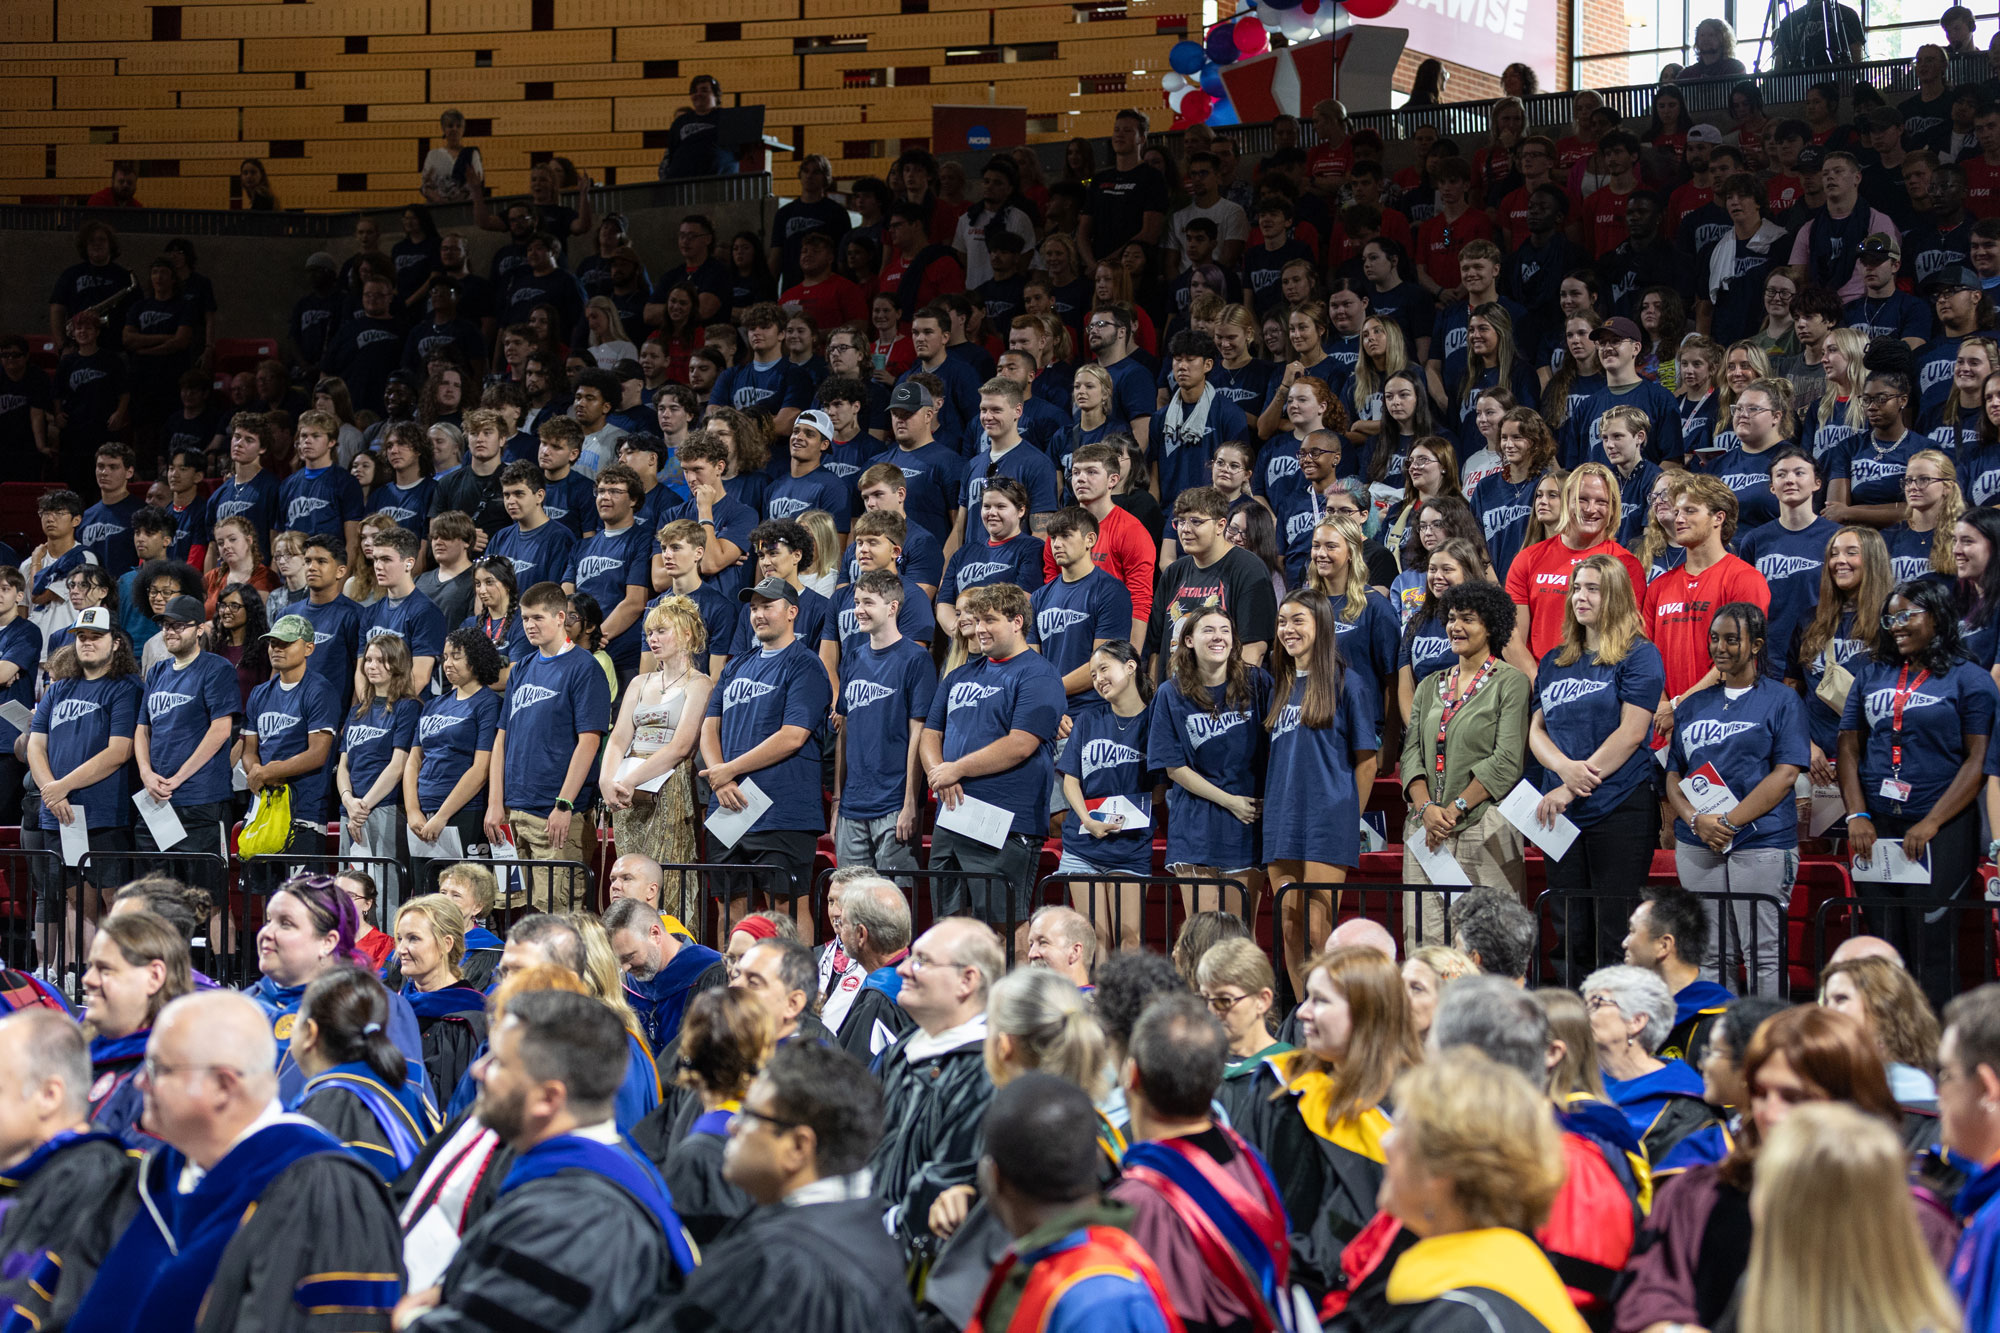 Students in Convocation Center